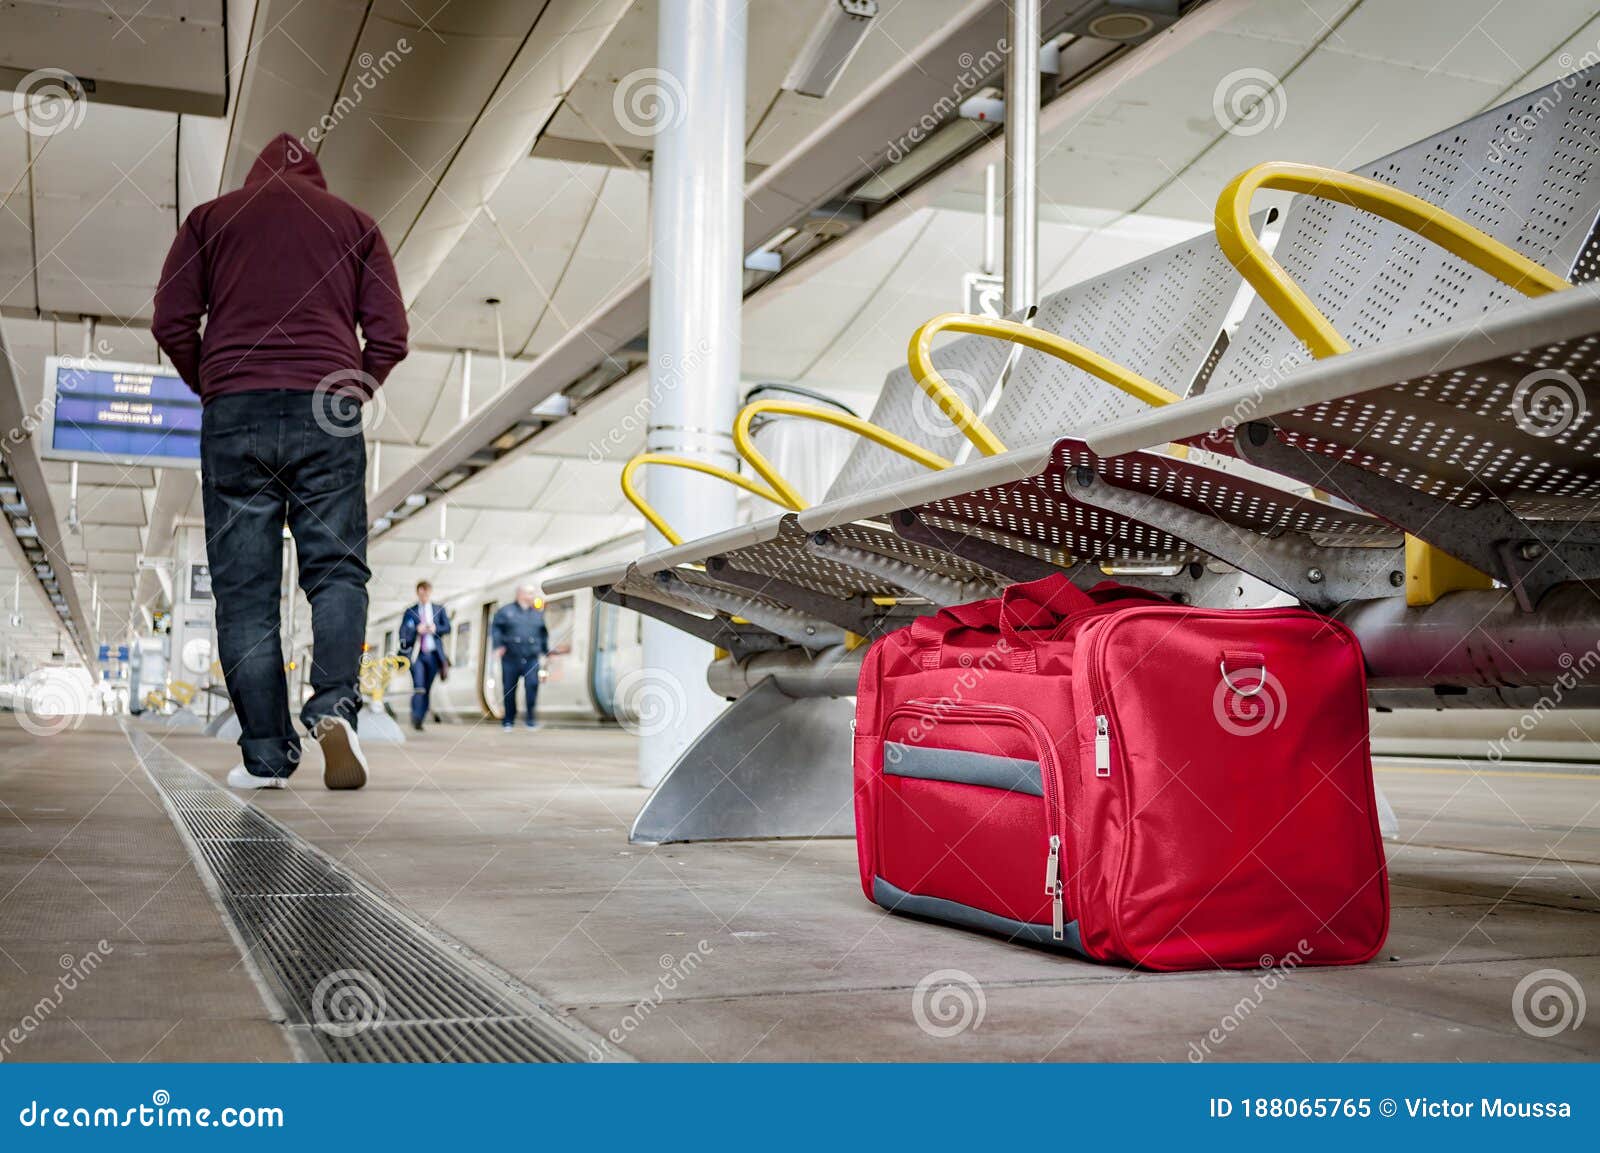 terrorism and public safety concept with an unattended bag left under chair on platform at train station or airport and man